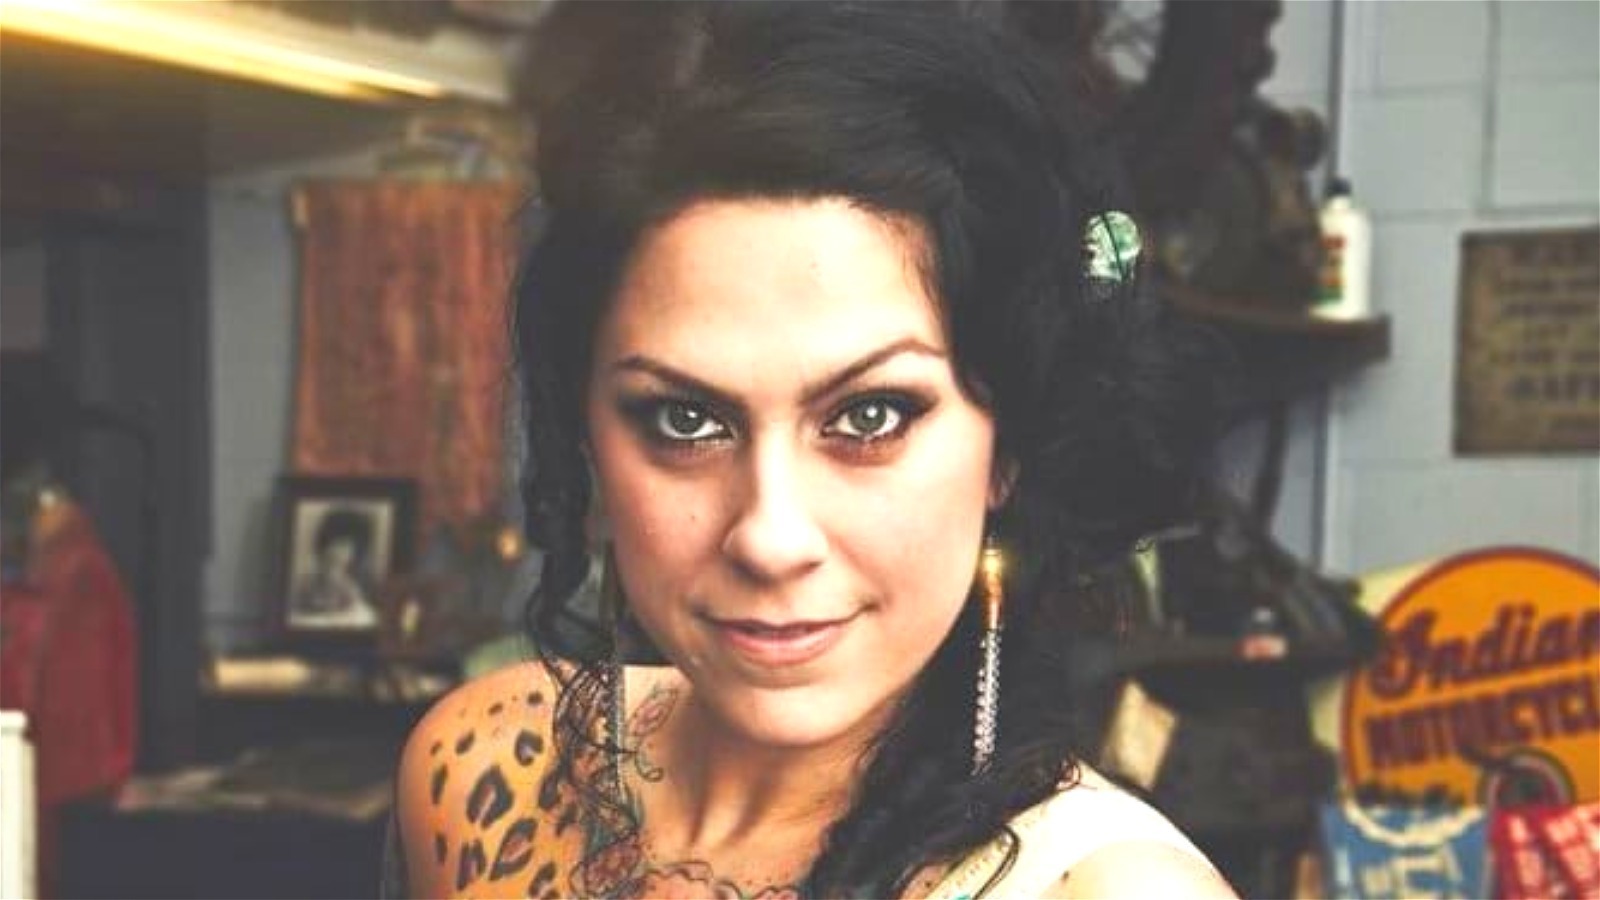 American Pickers star Danielle Colby shares rare pic with fiancé Jeremy  Scheuch  Danielle colby American pickers Rare photos